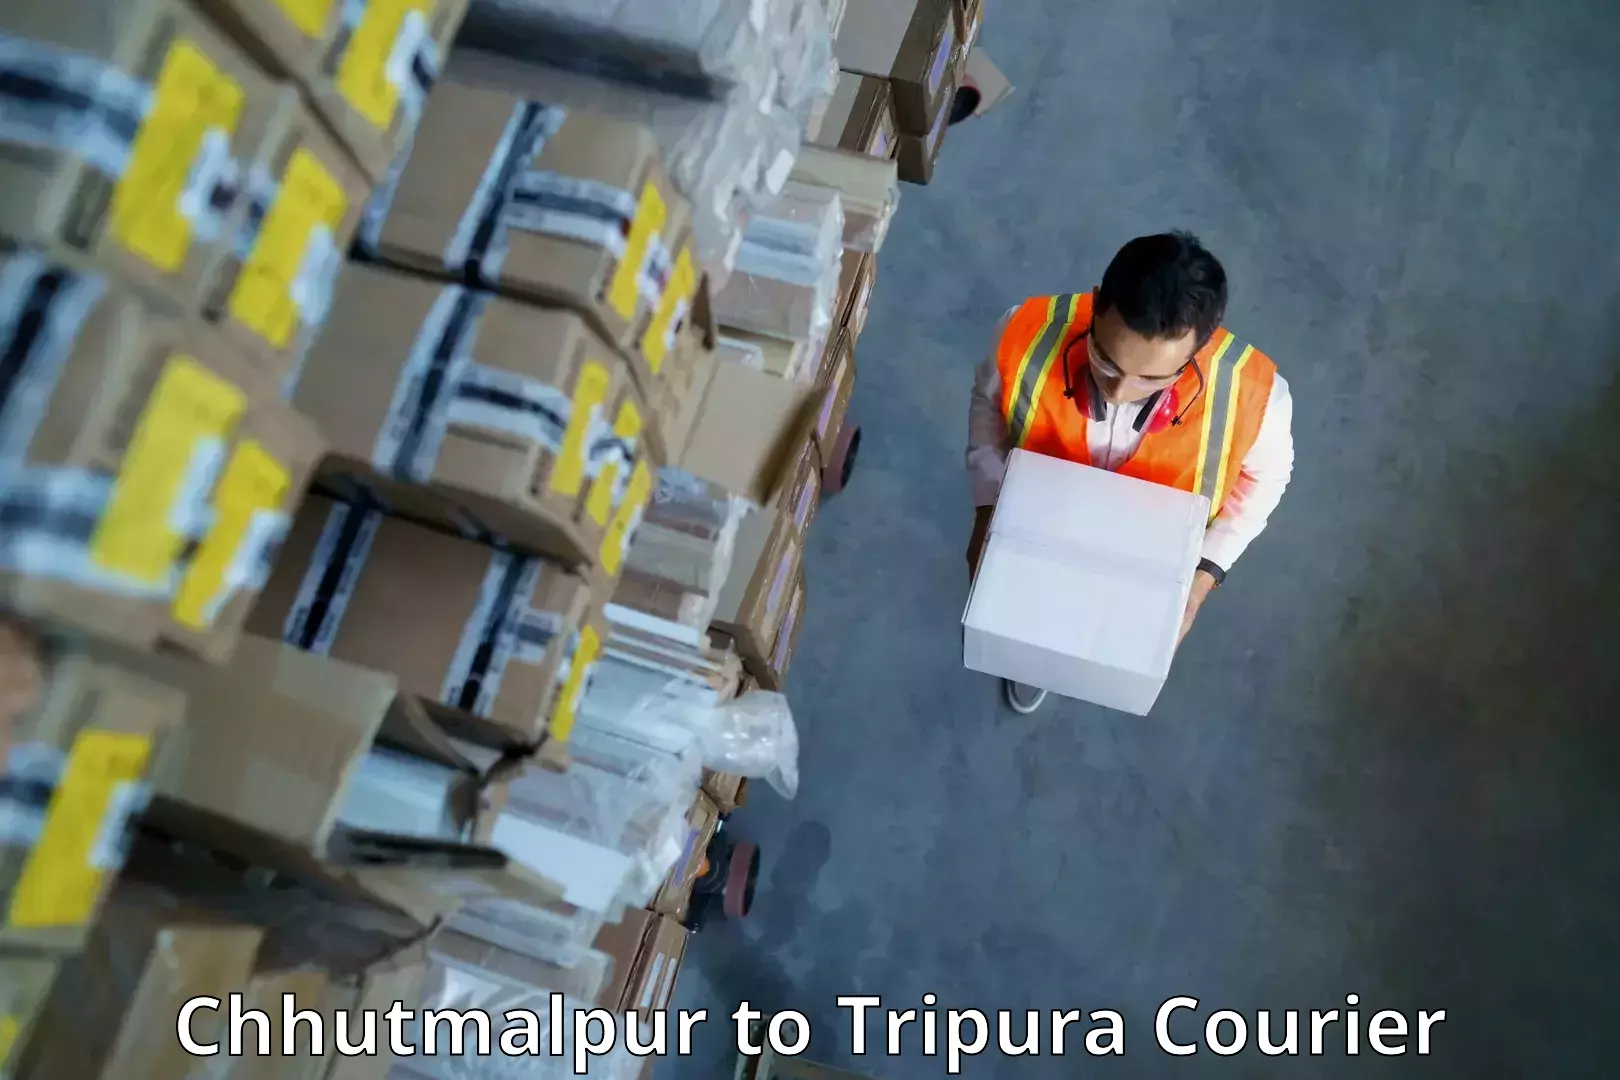 Business delivery service Chhutmalpur to South Tripura